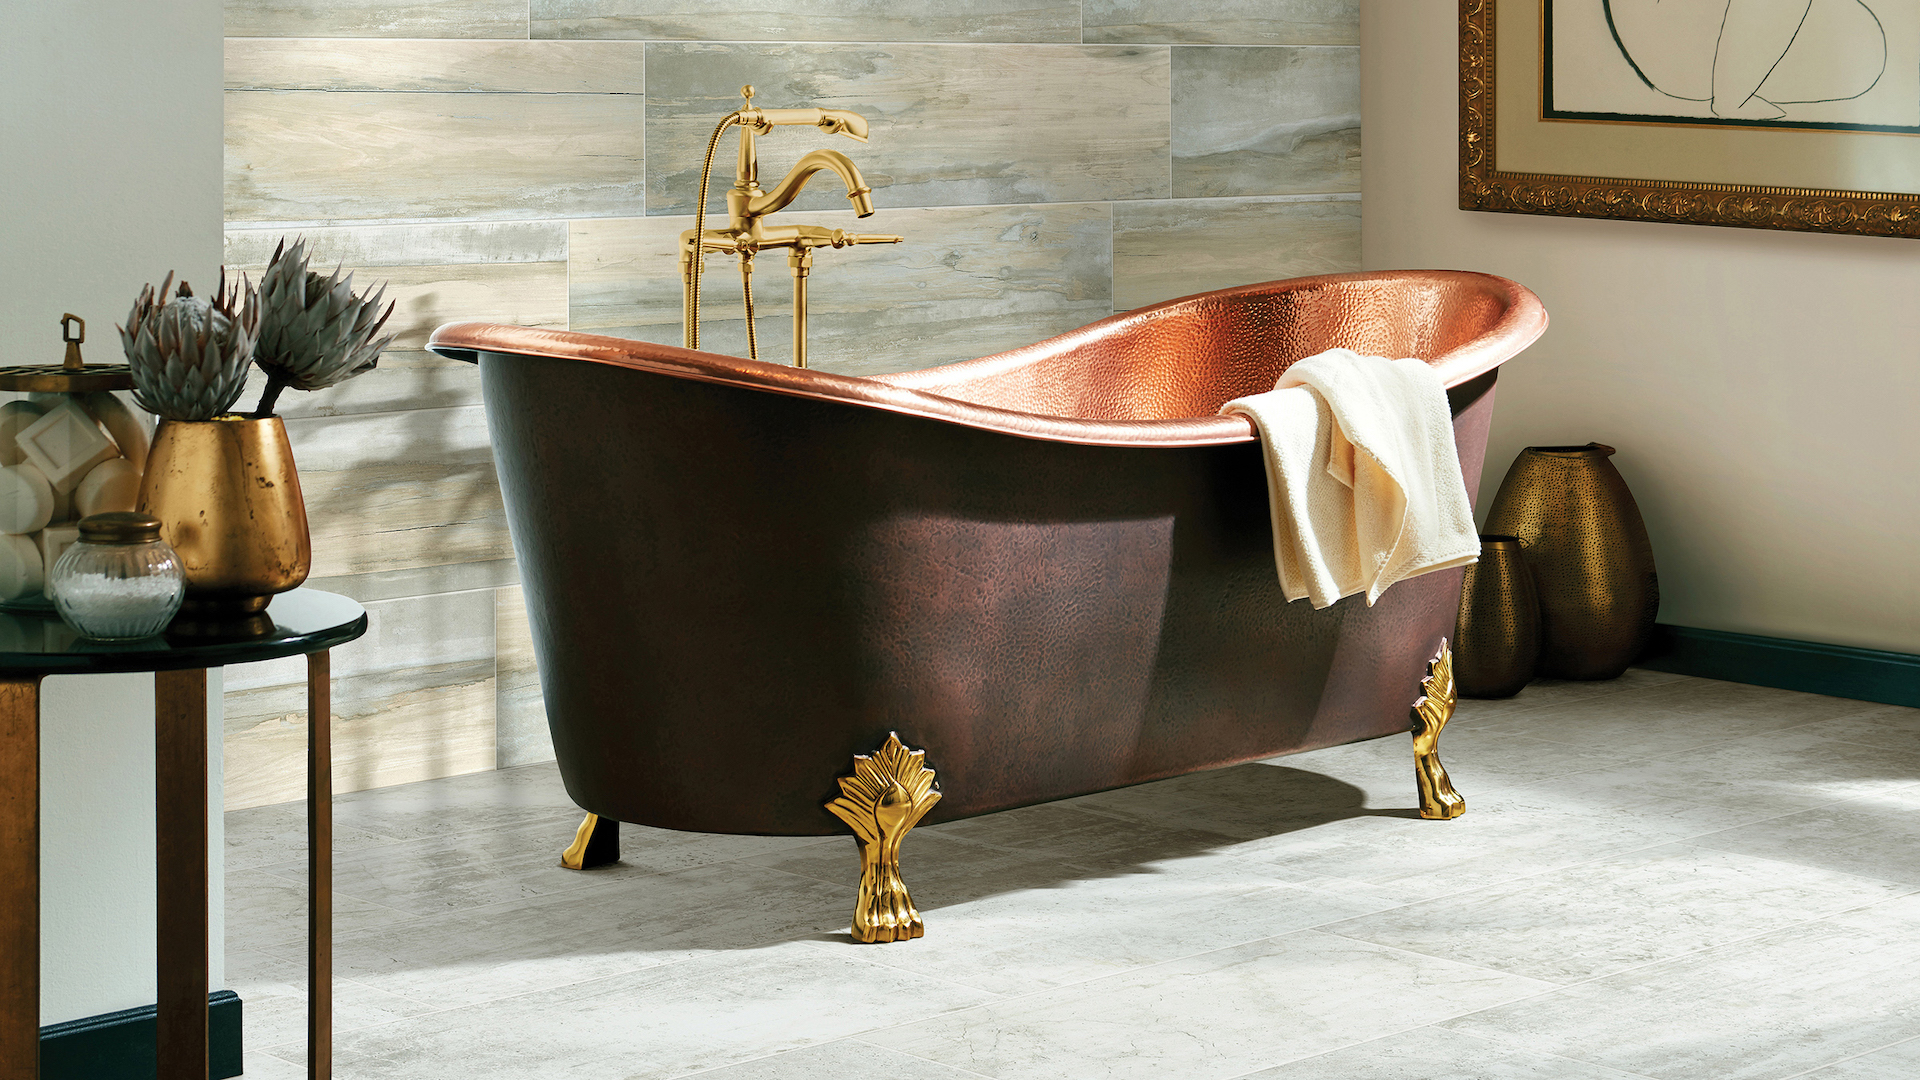 grey tile flooring in a spacious bathroom with a copper tub and wood look tile accent wall